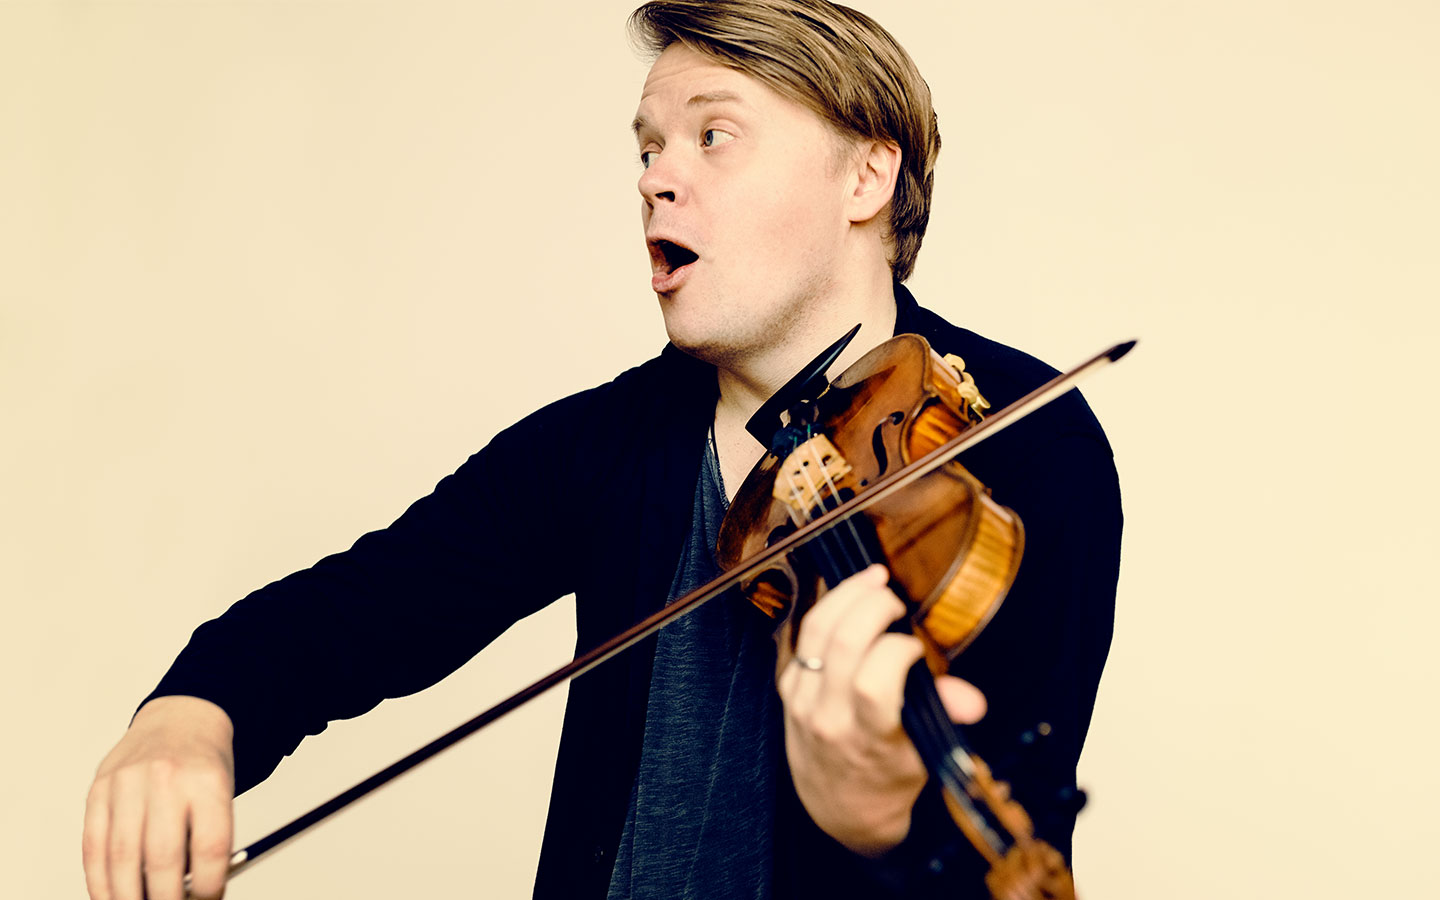 Pekka Kuusisto playing violin in front of a light yellow background